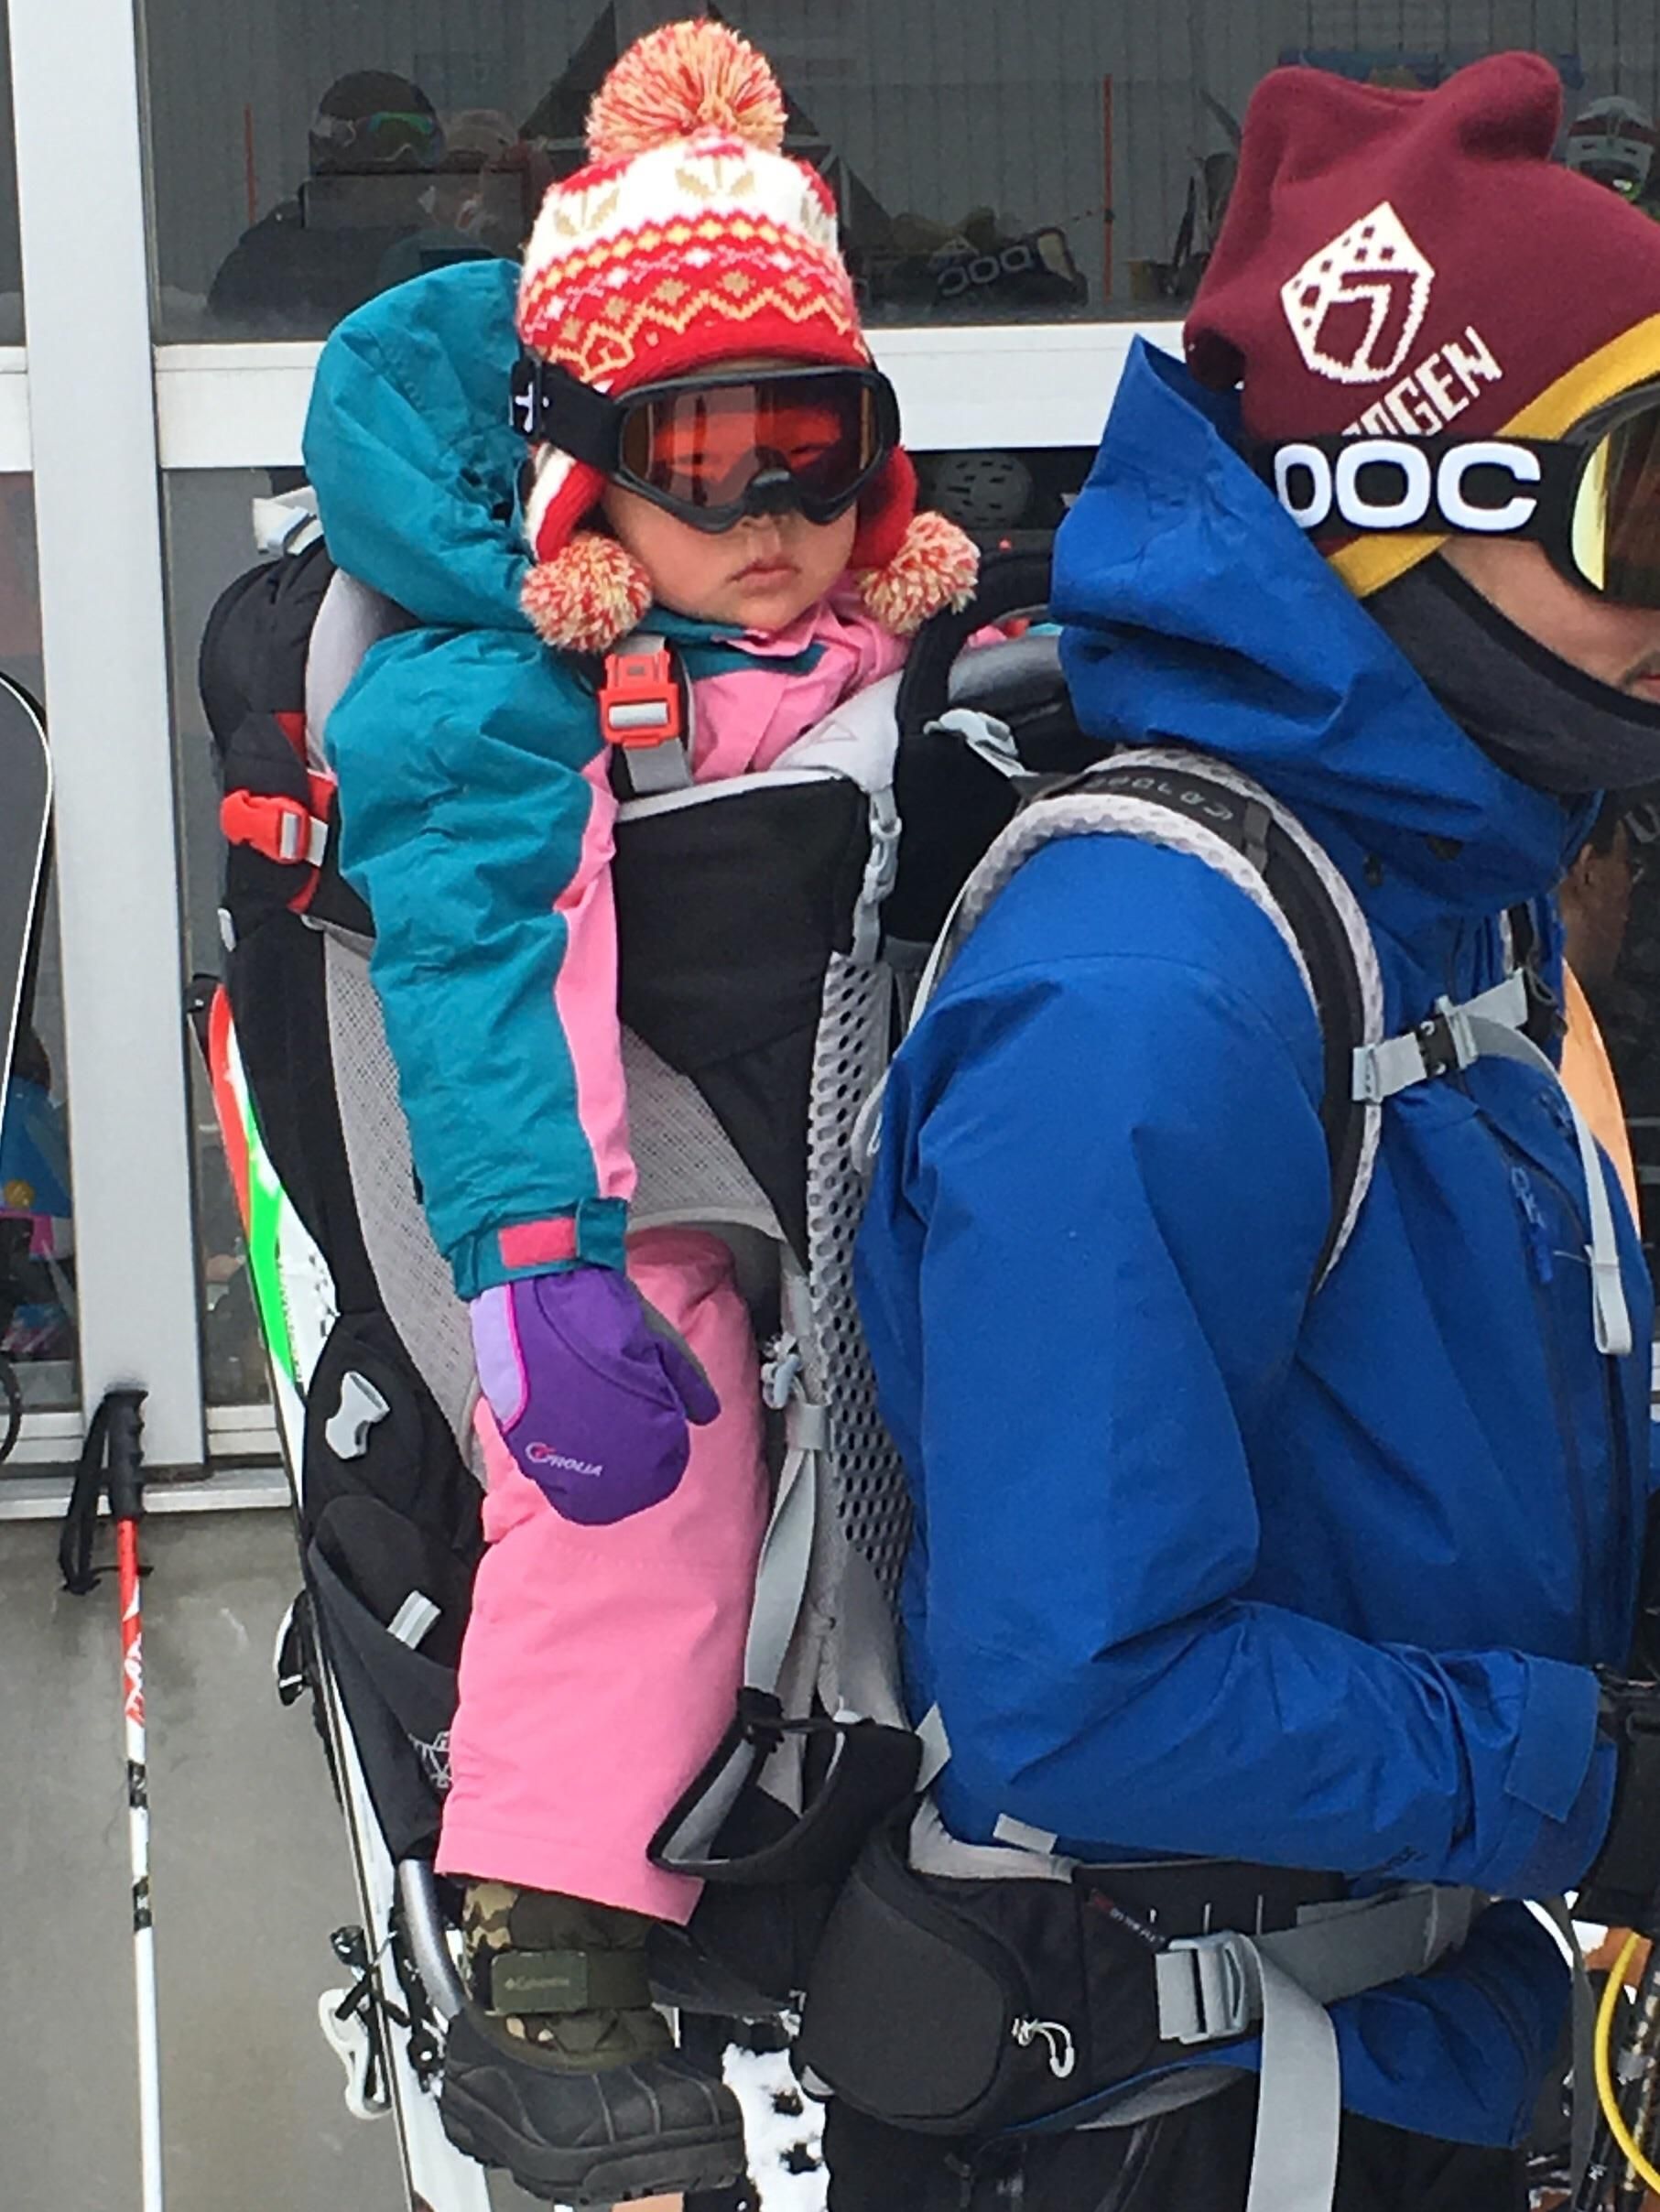 You know who loves skiing? Not this kid.